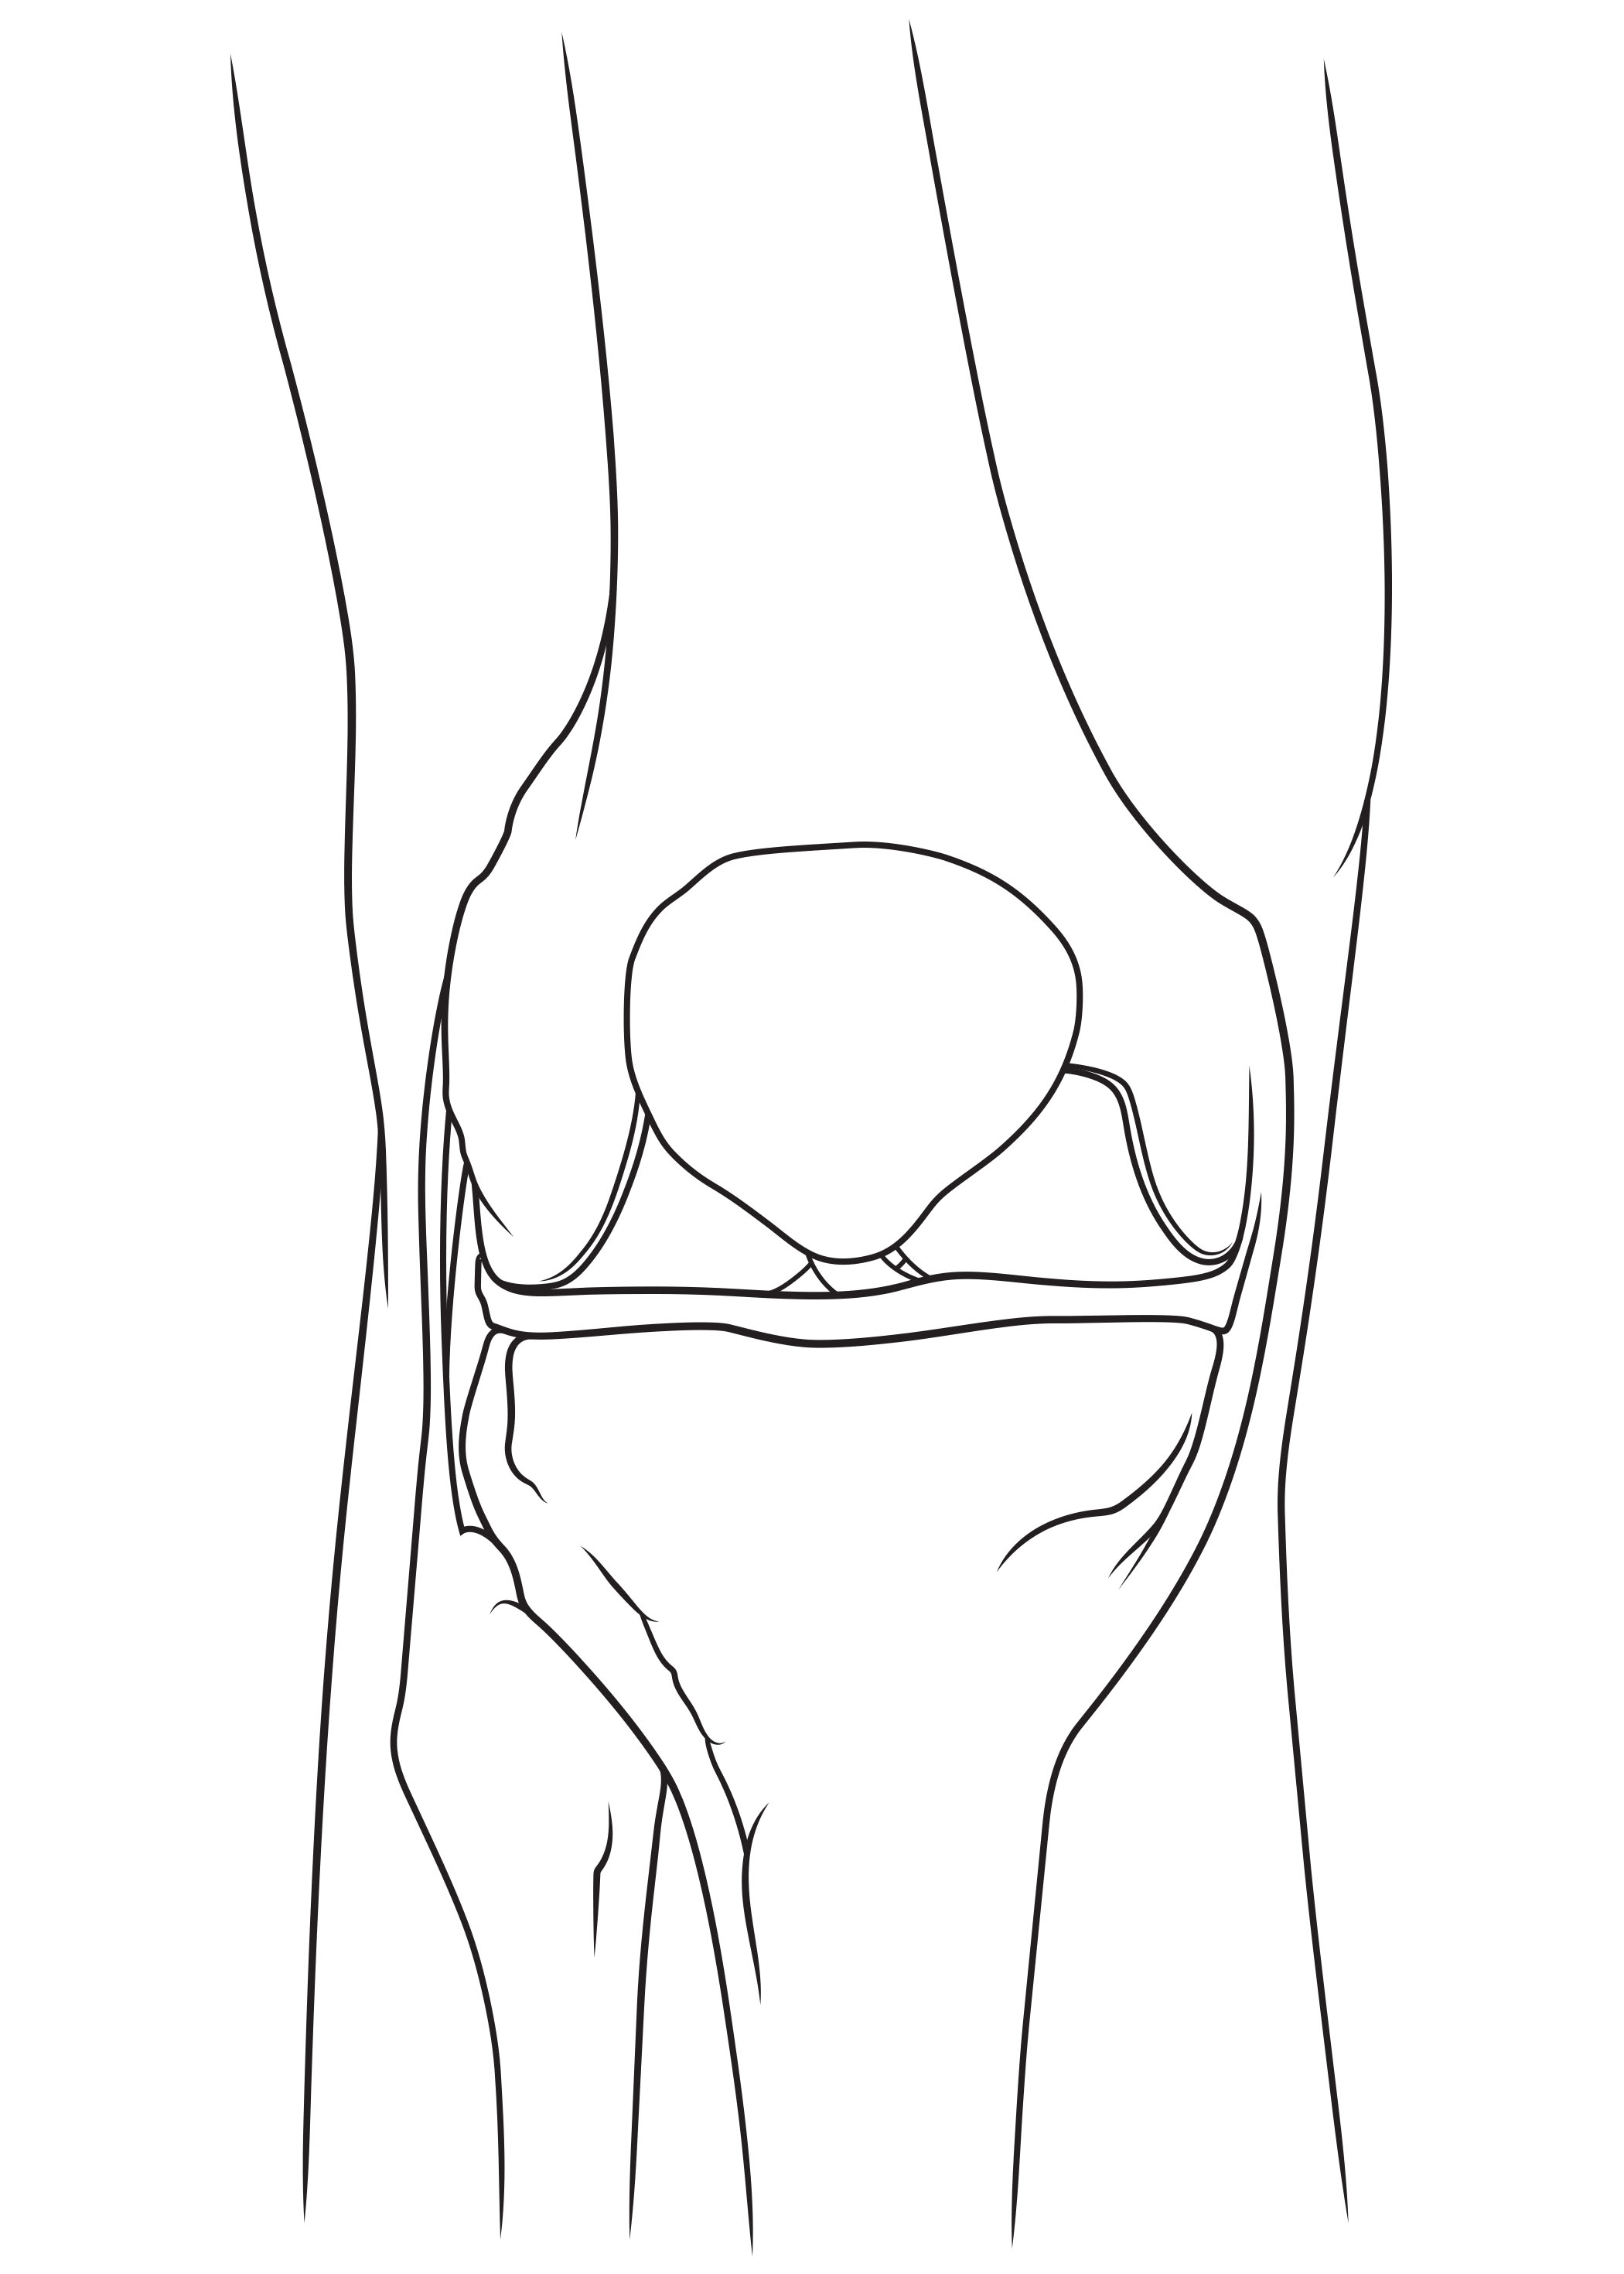 Front view of the knee joint